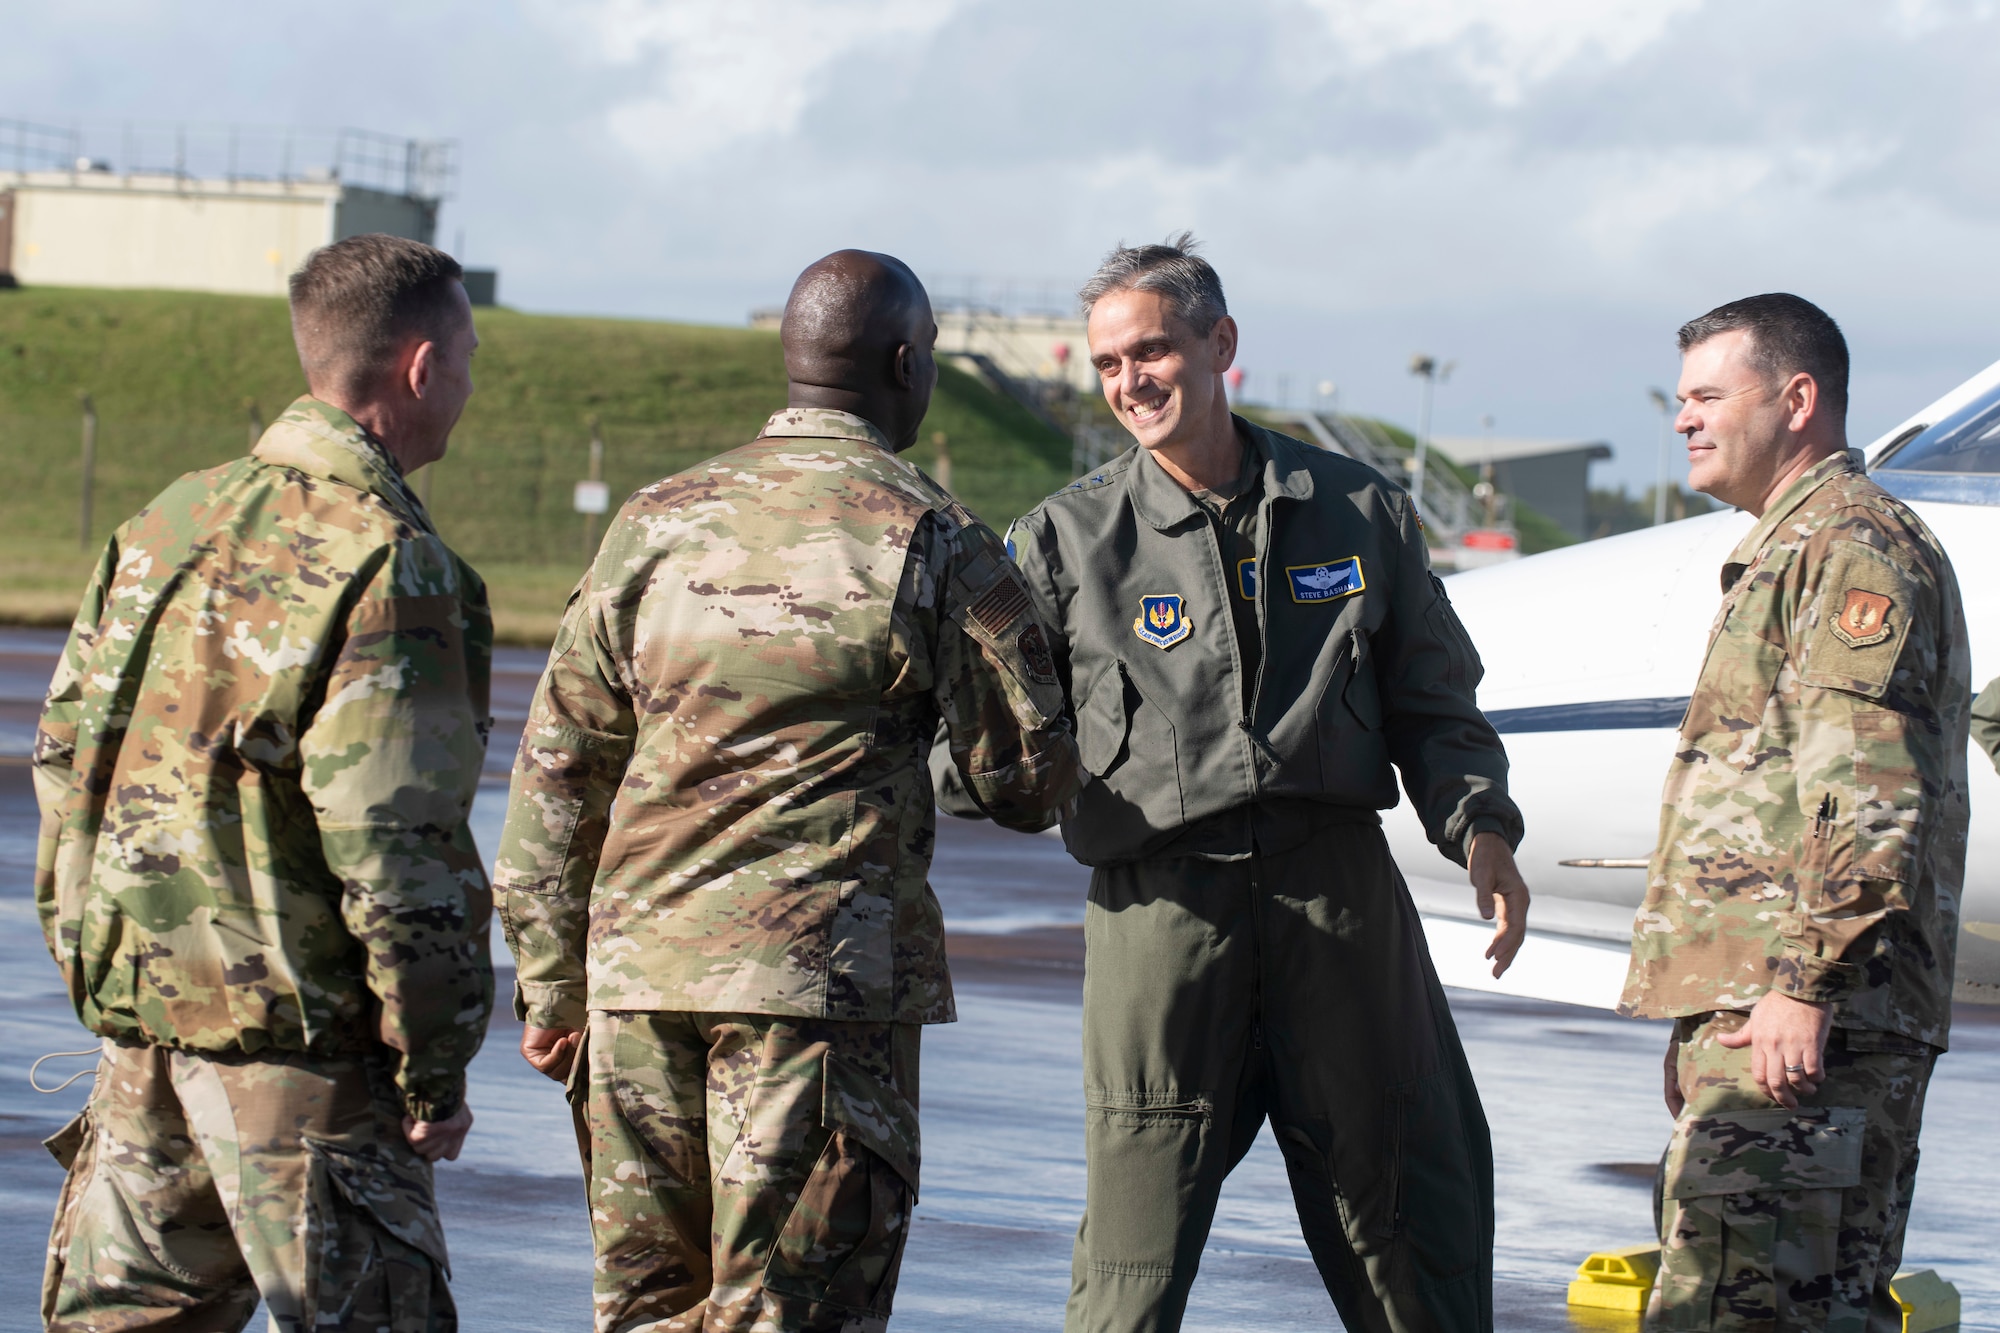 U.S. Air Force Lt. Gen. Steven Basham, center right, U.S. Air Forces in Europe-Air Forces Africa deputy commander, greets Chief Master Sgt. Ralph Oliver, center left, 423rd Air Base Group command chief, during a visit to Royal Air Force Fairford, England, Oct. 20, 2021. Basham visited RAF Fairford to immerse with Airmen from the 9th Expeditionary Bomb Squadron who are temporarily stationed at Fairford for a BTF deployment. A BTF is the global employment of U.S. Strategic bombers, providing strategic military advantage to achieve national and combatant commander objectives. (U.S. Air Force photo by Senior Airman Jennifer Zima)